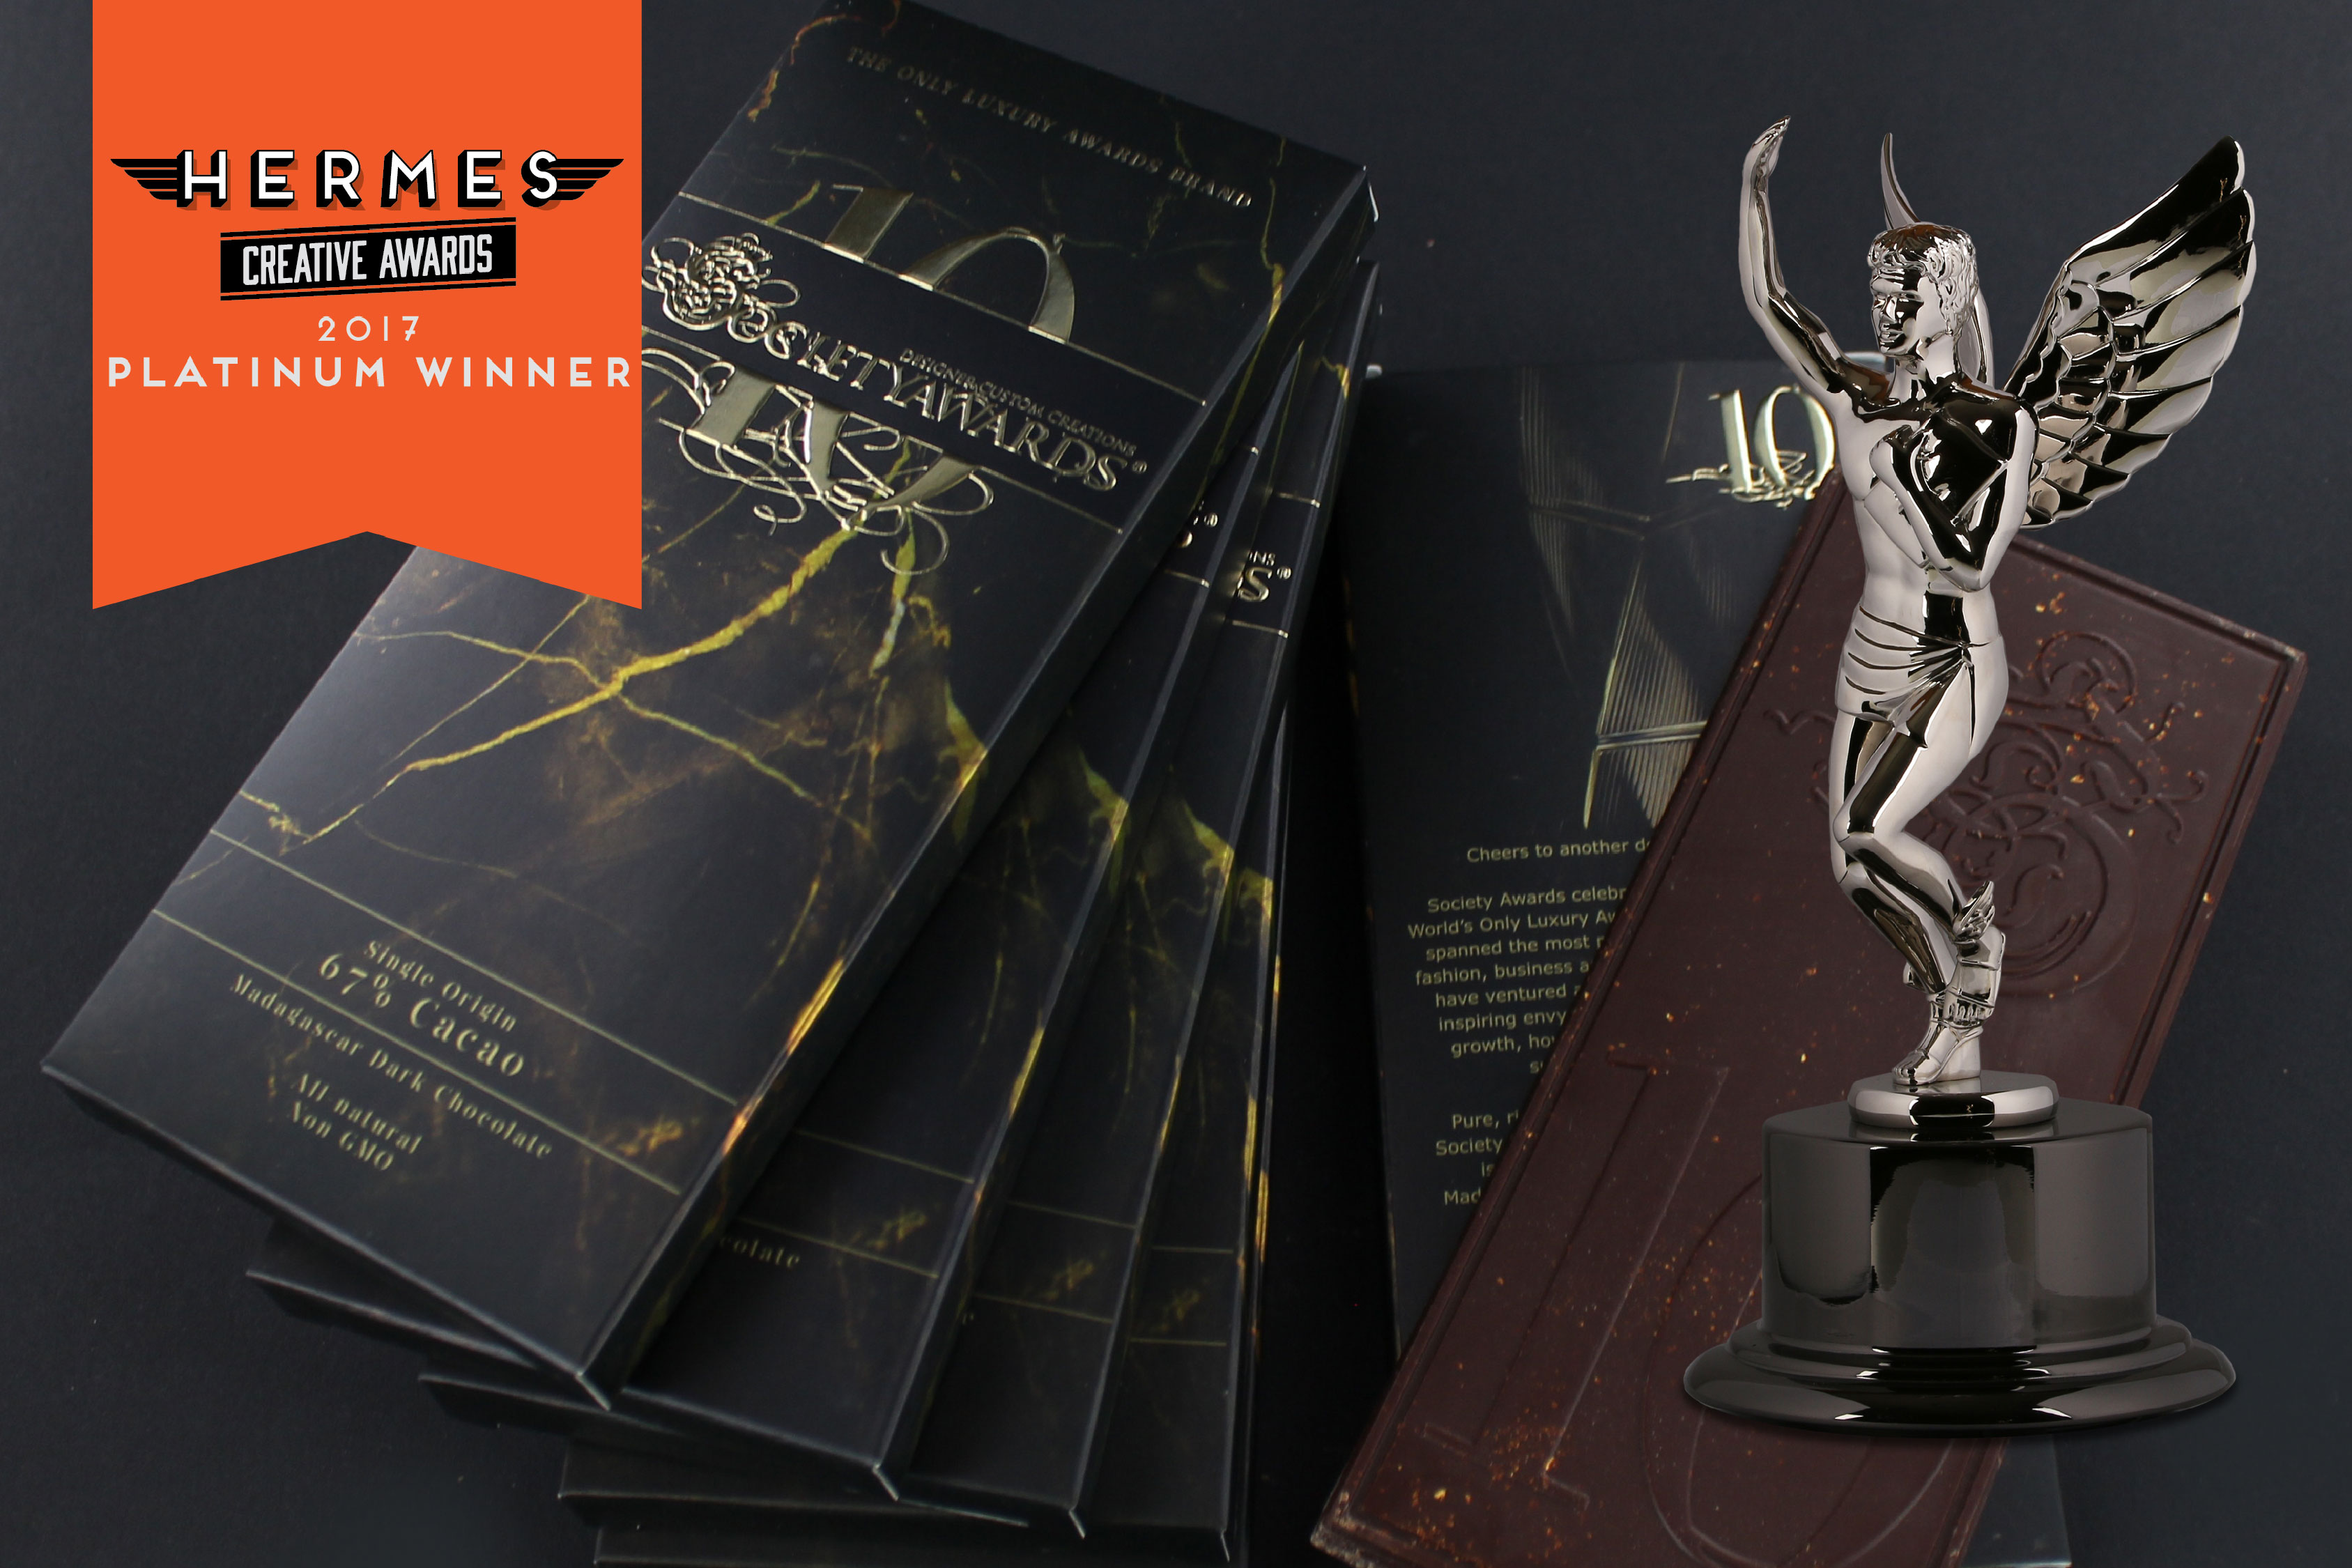 Stack of custom chocolate bar boxes designed by Viceroy Creative for our 10 Year Anniversary Chocolate. Also, image of Hermes award